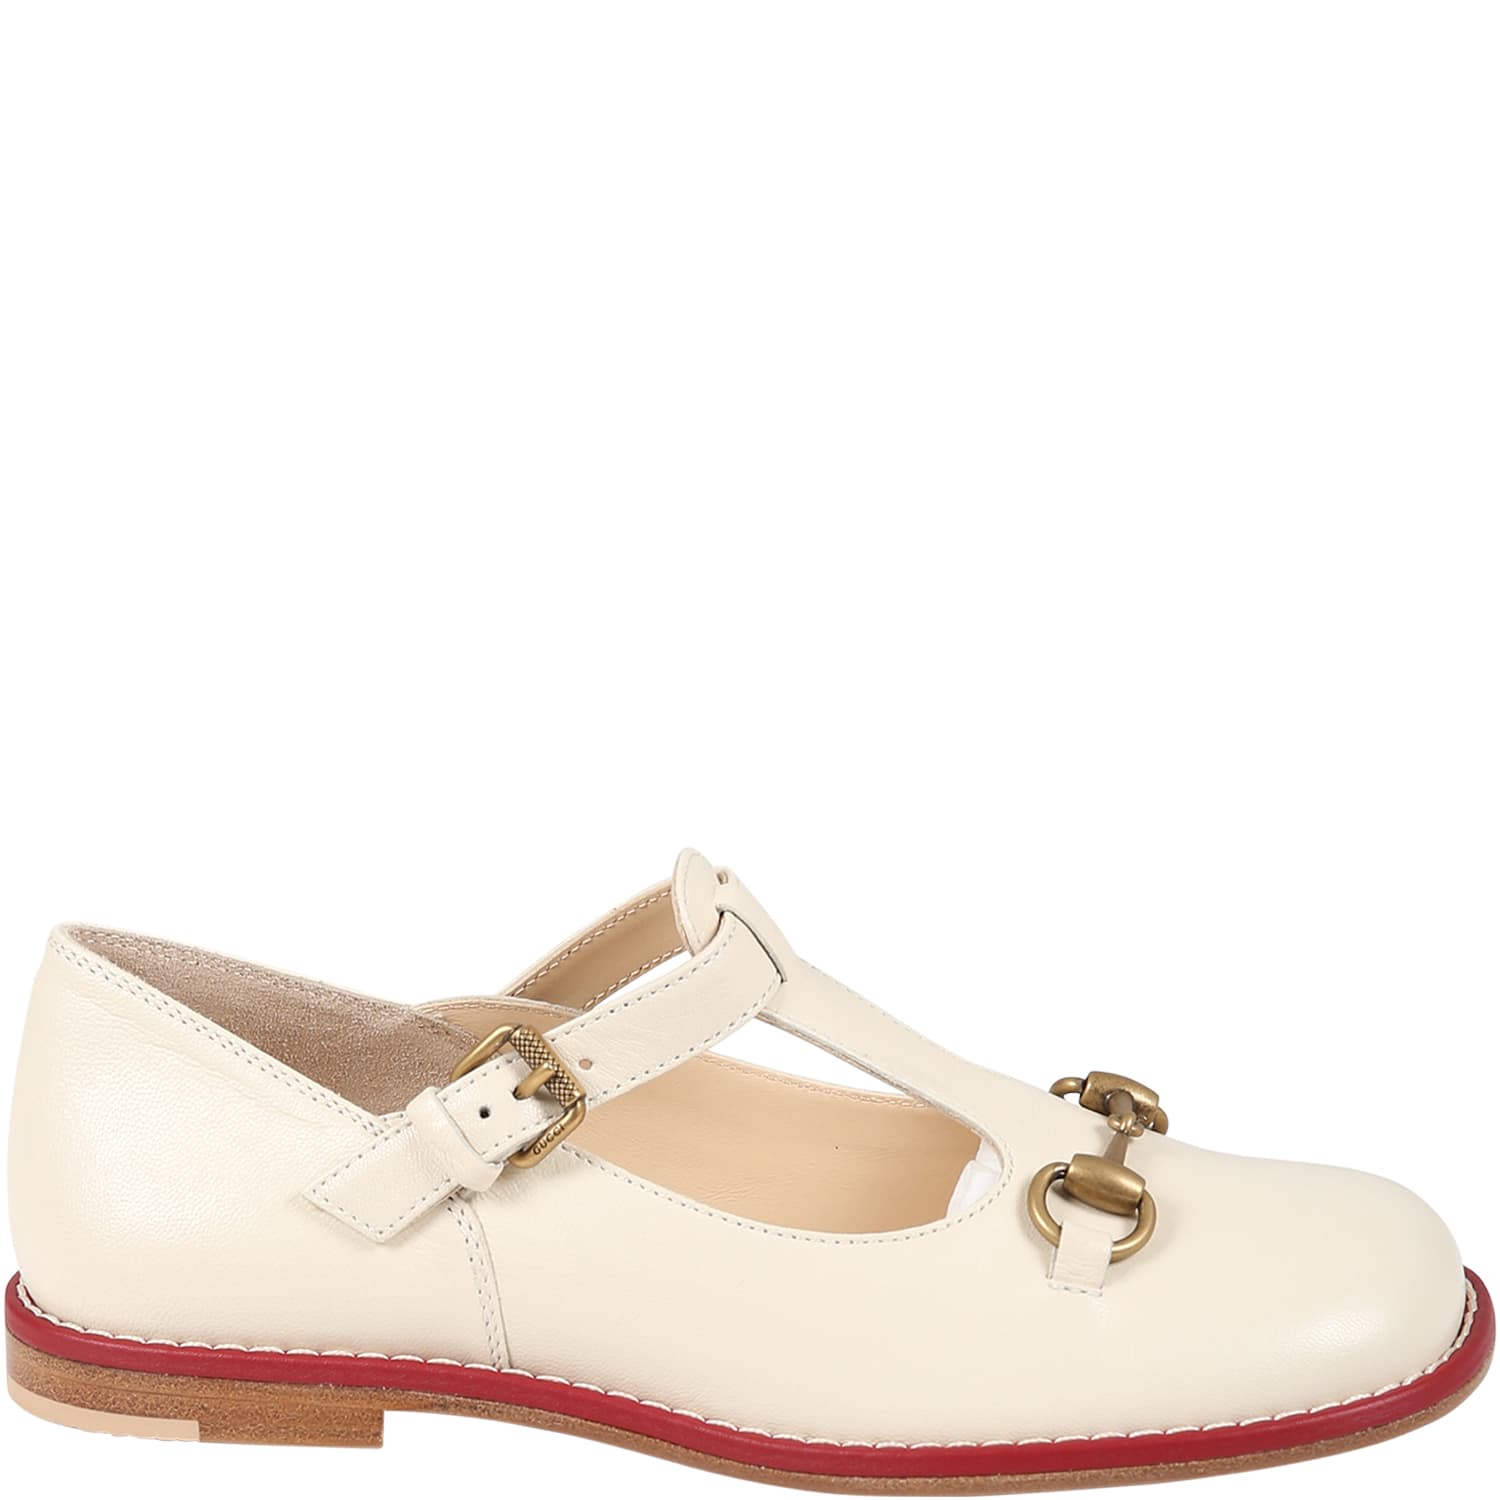 Gucci Ivory Ballet Flats For Girl With Iconic Horsebit